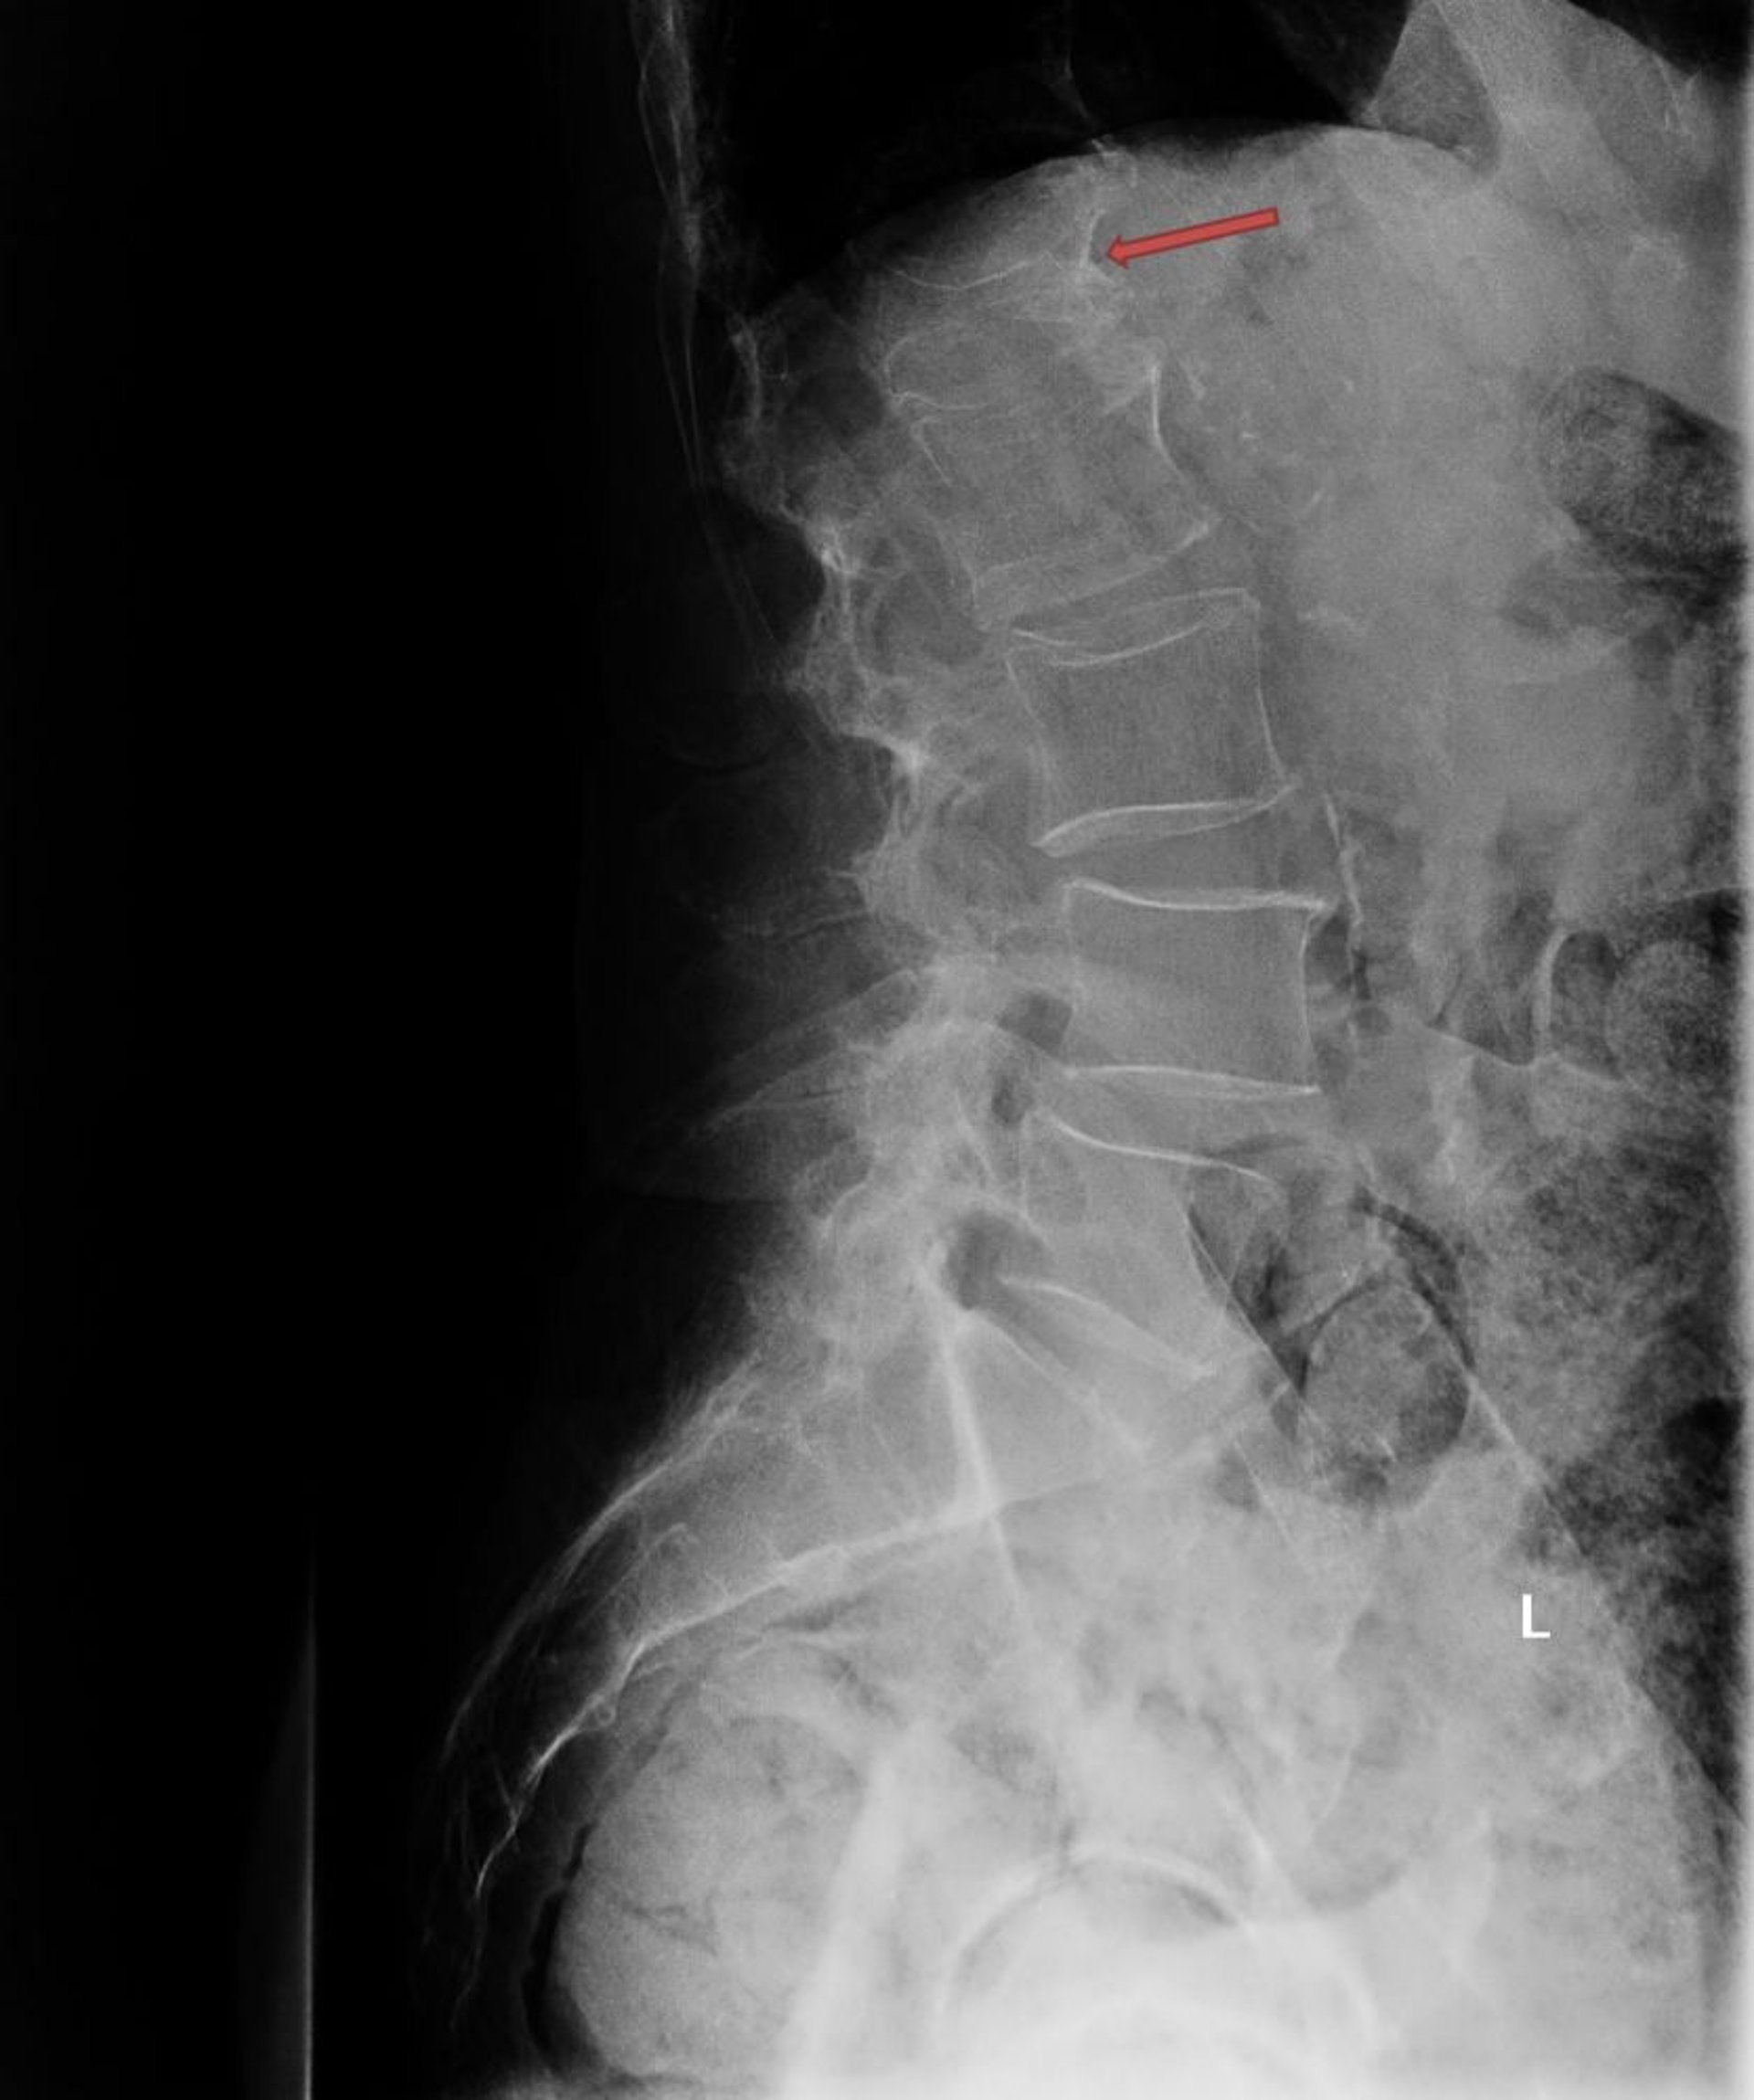 Osteoporotic Compression Fracture